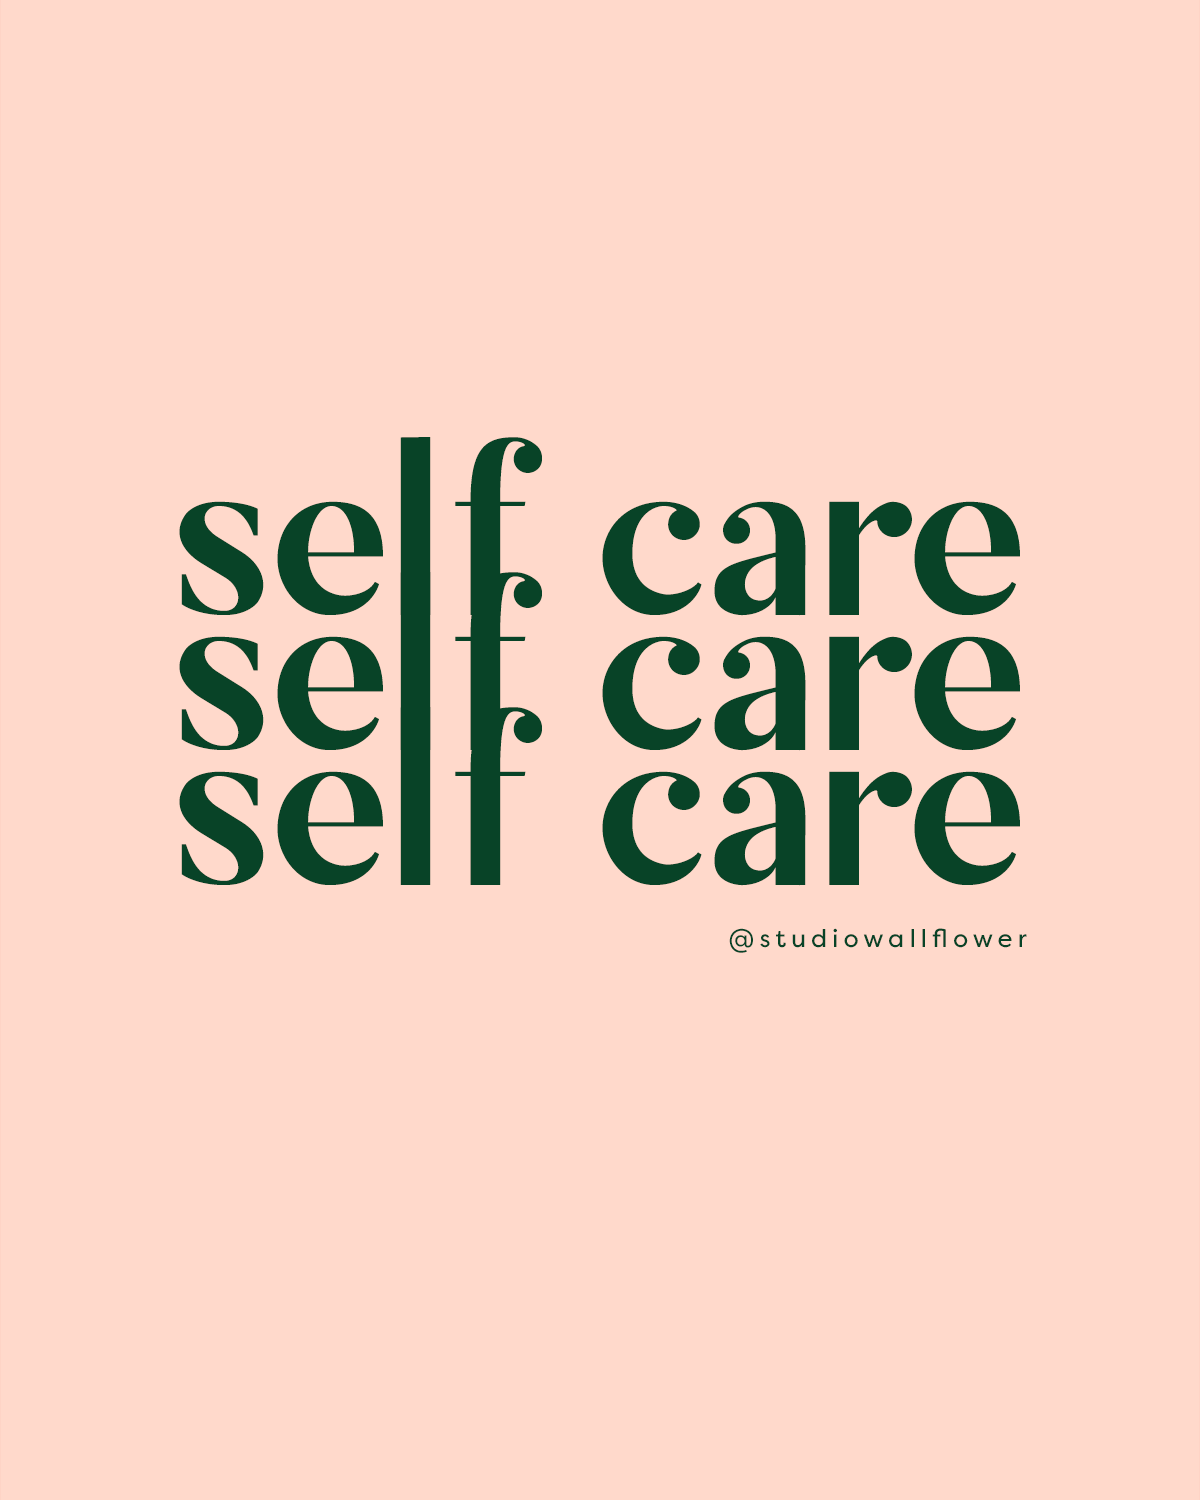 Truth About Self Care | What No One Tells You About Self Care